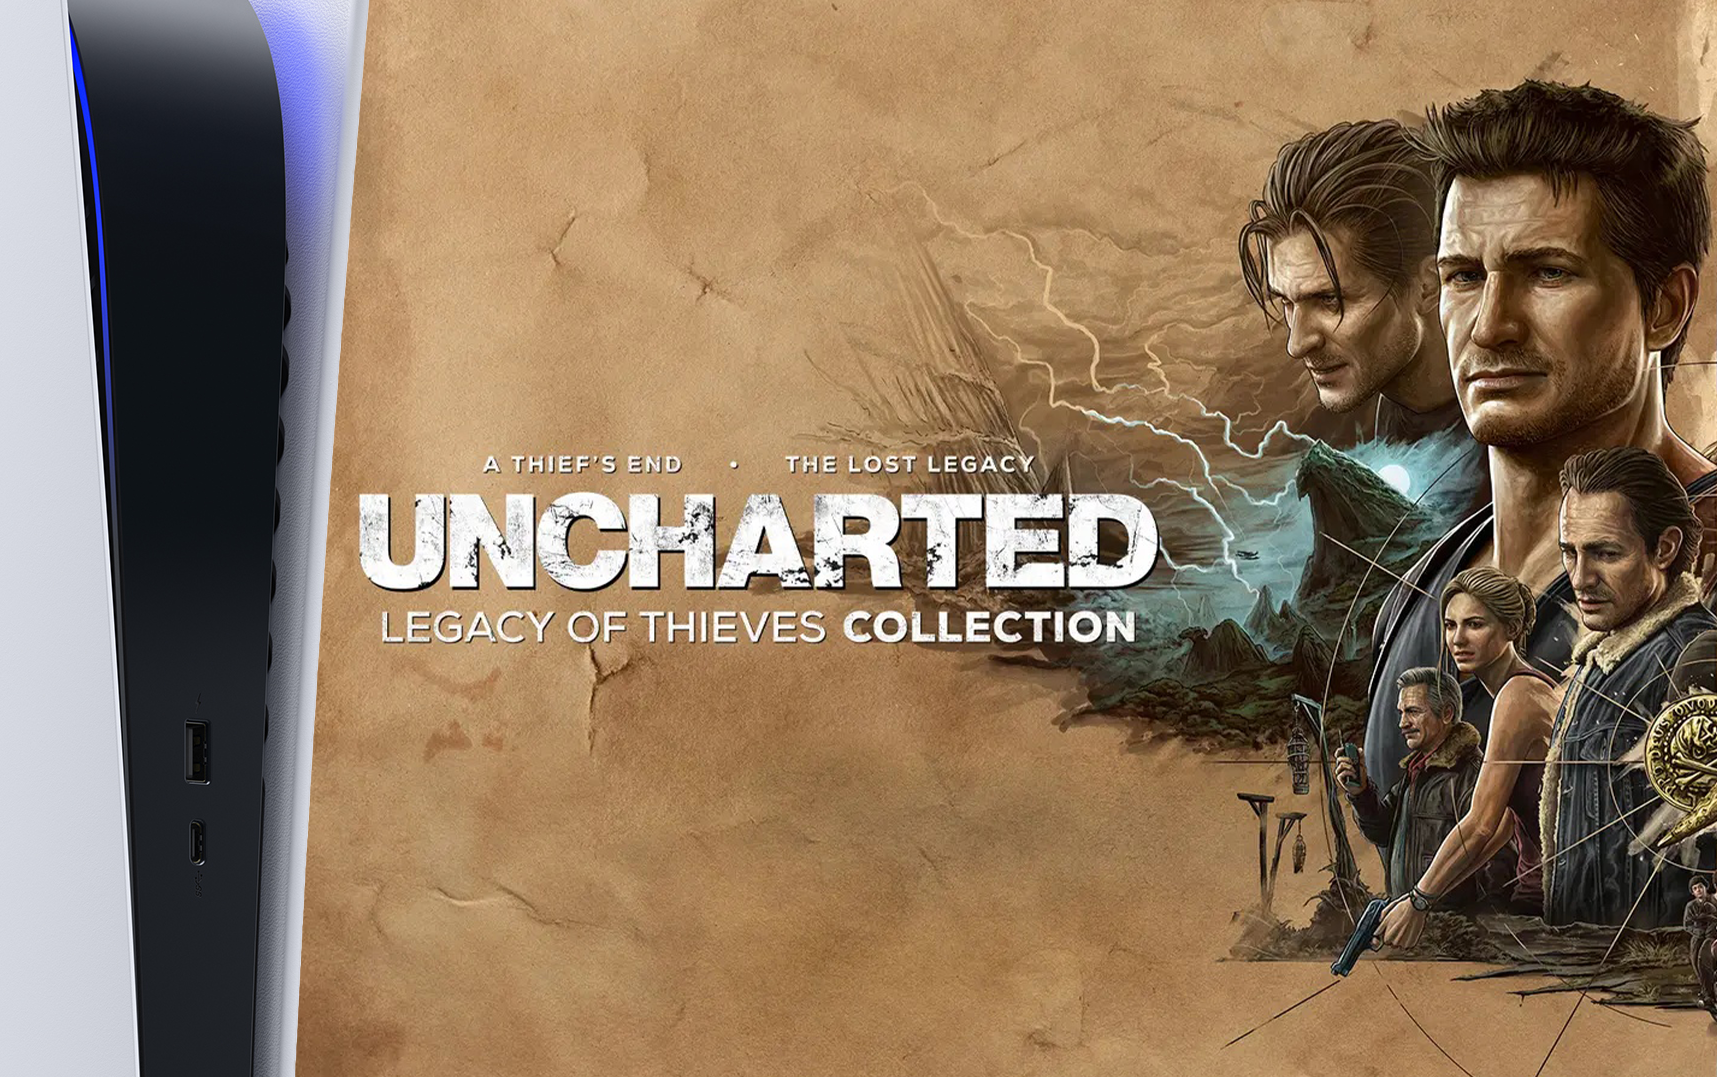 Uncharted™: наследие воров. Коллекция. Uncharted 4 наследие воров. Игра Uncharted наследие воров. Uncharted 4 Legacy of Thieves collection.